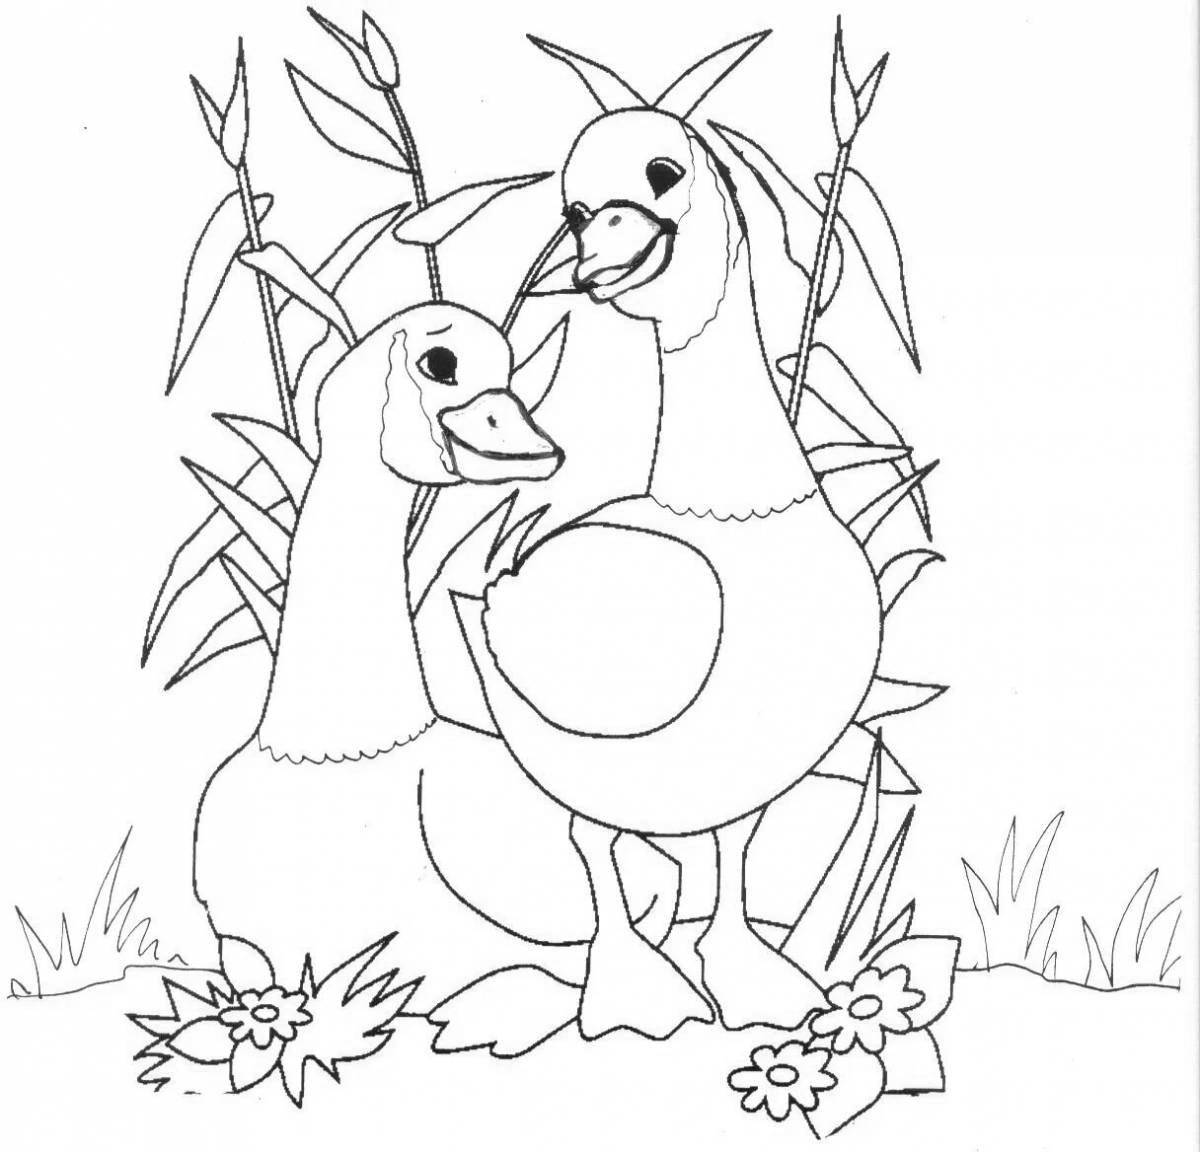 Glamorous geese coloring page for girls